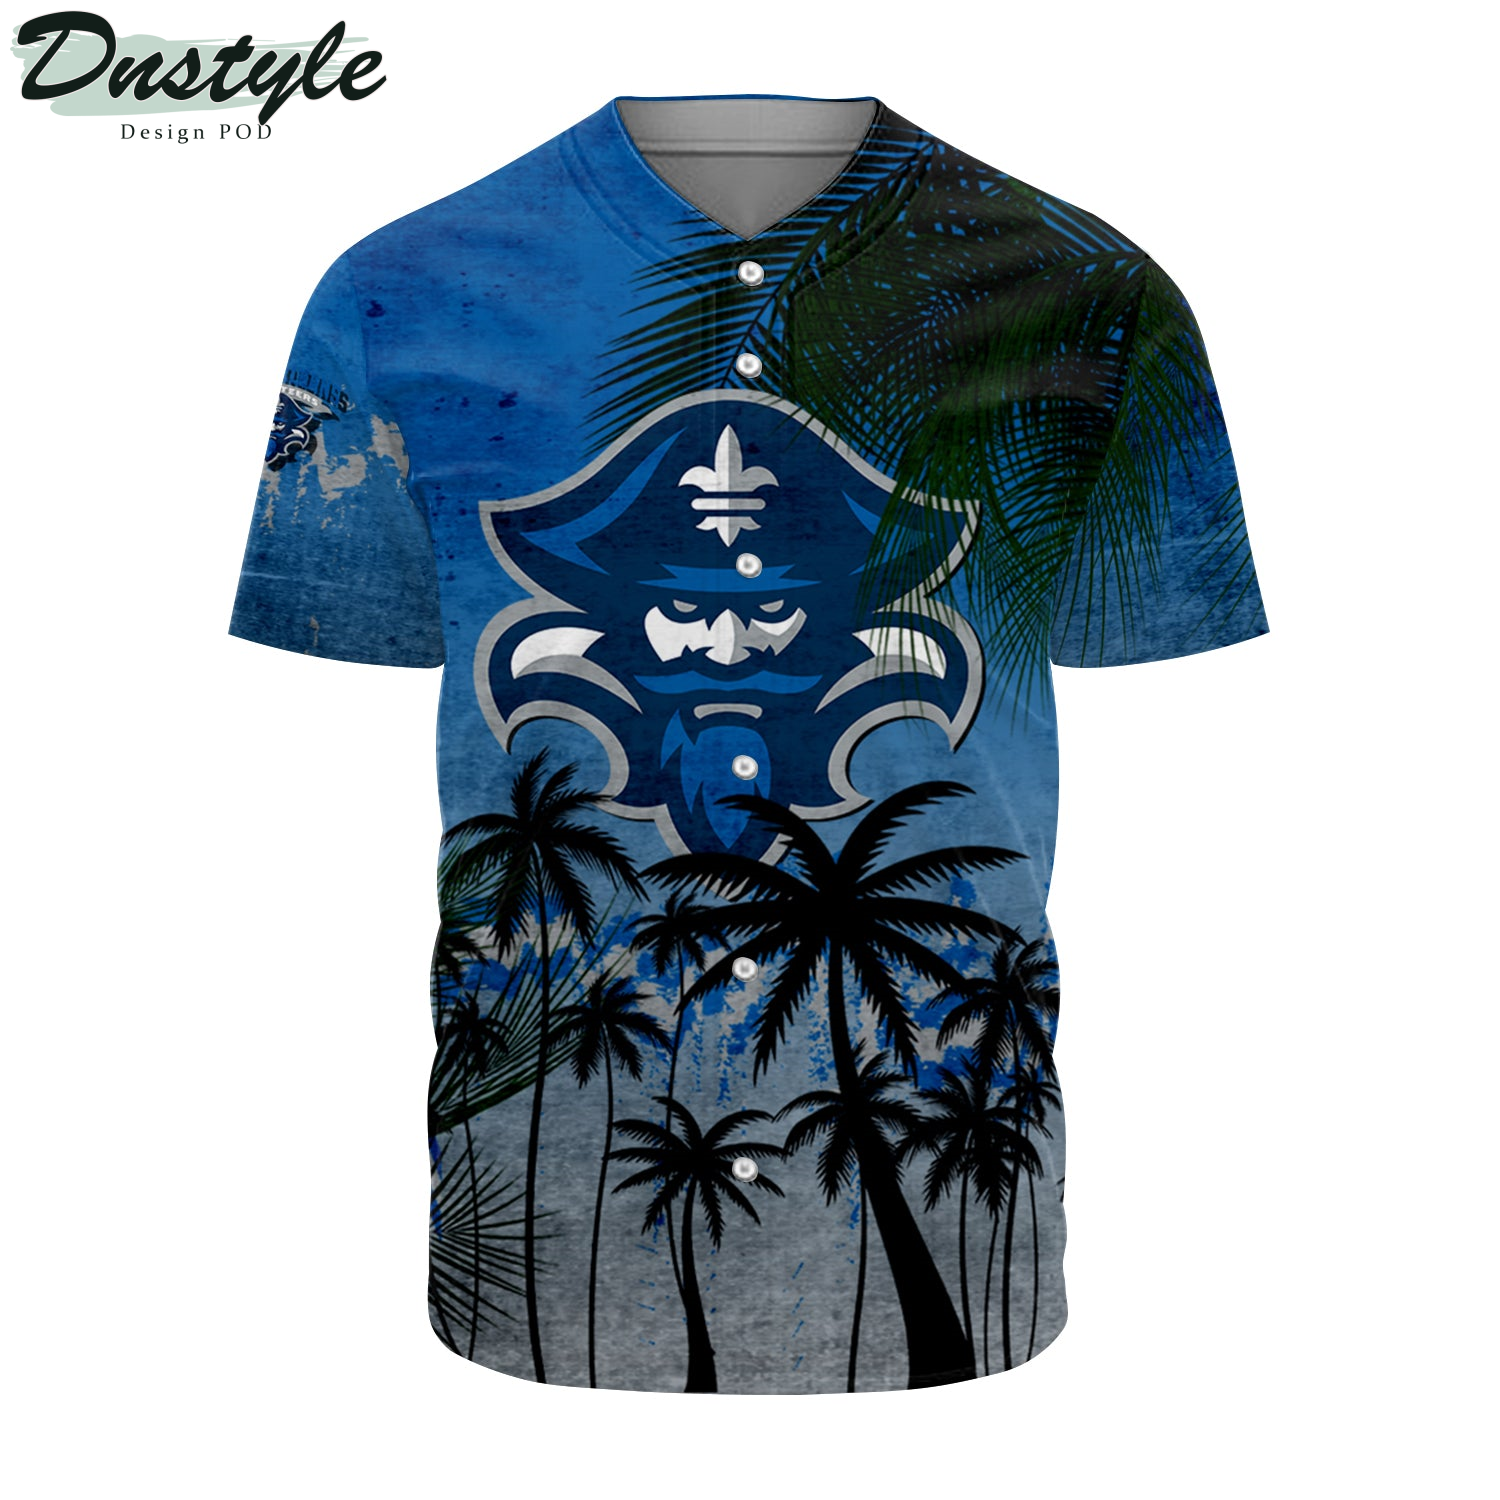 New Orleans Privateers Baseball Jersey Coconut Tree Tropical Grunge